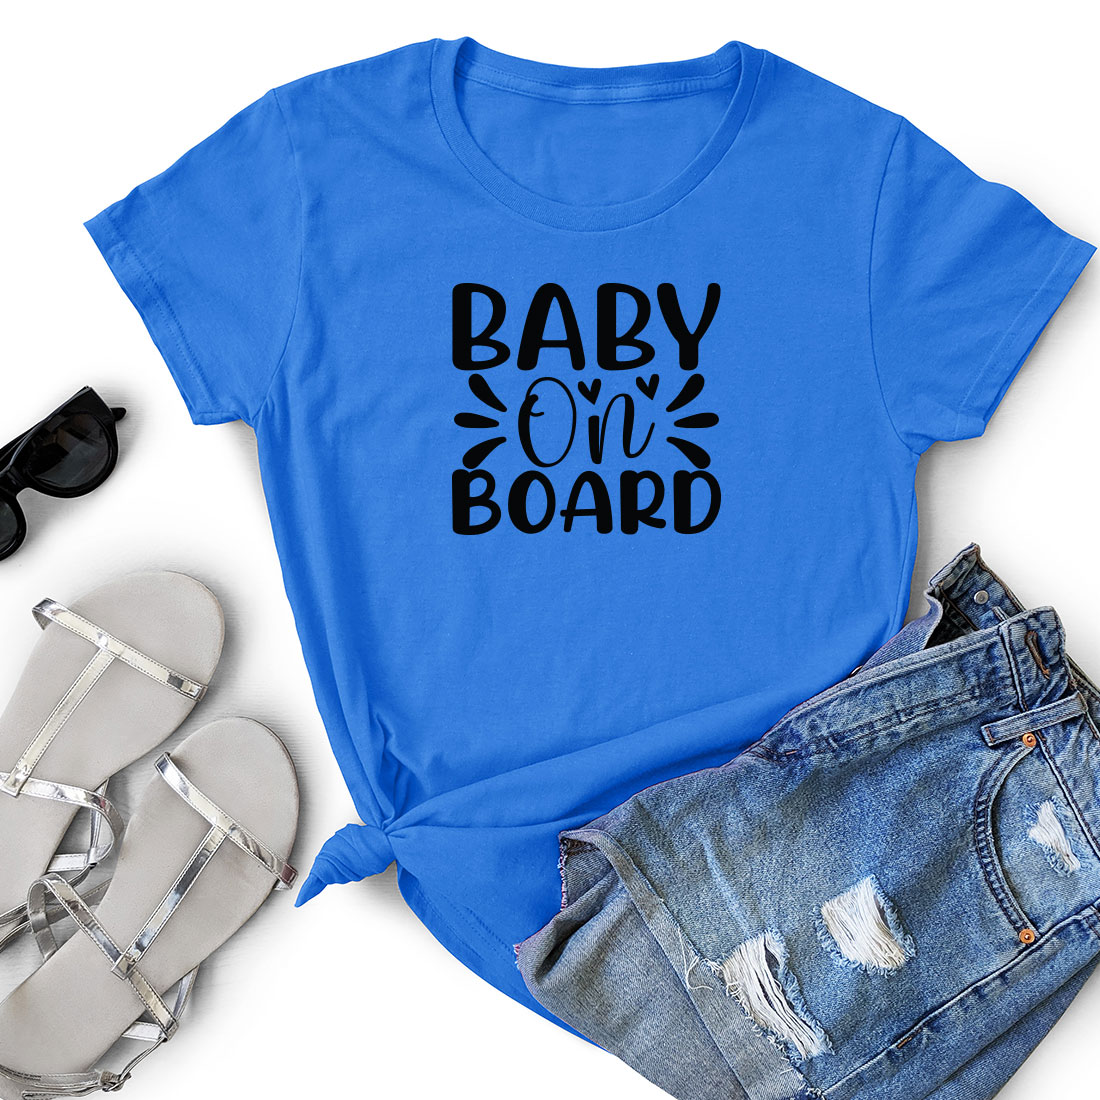 T - shirt that says baby on board next to a pair of shorts.